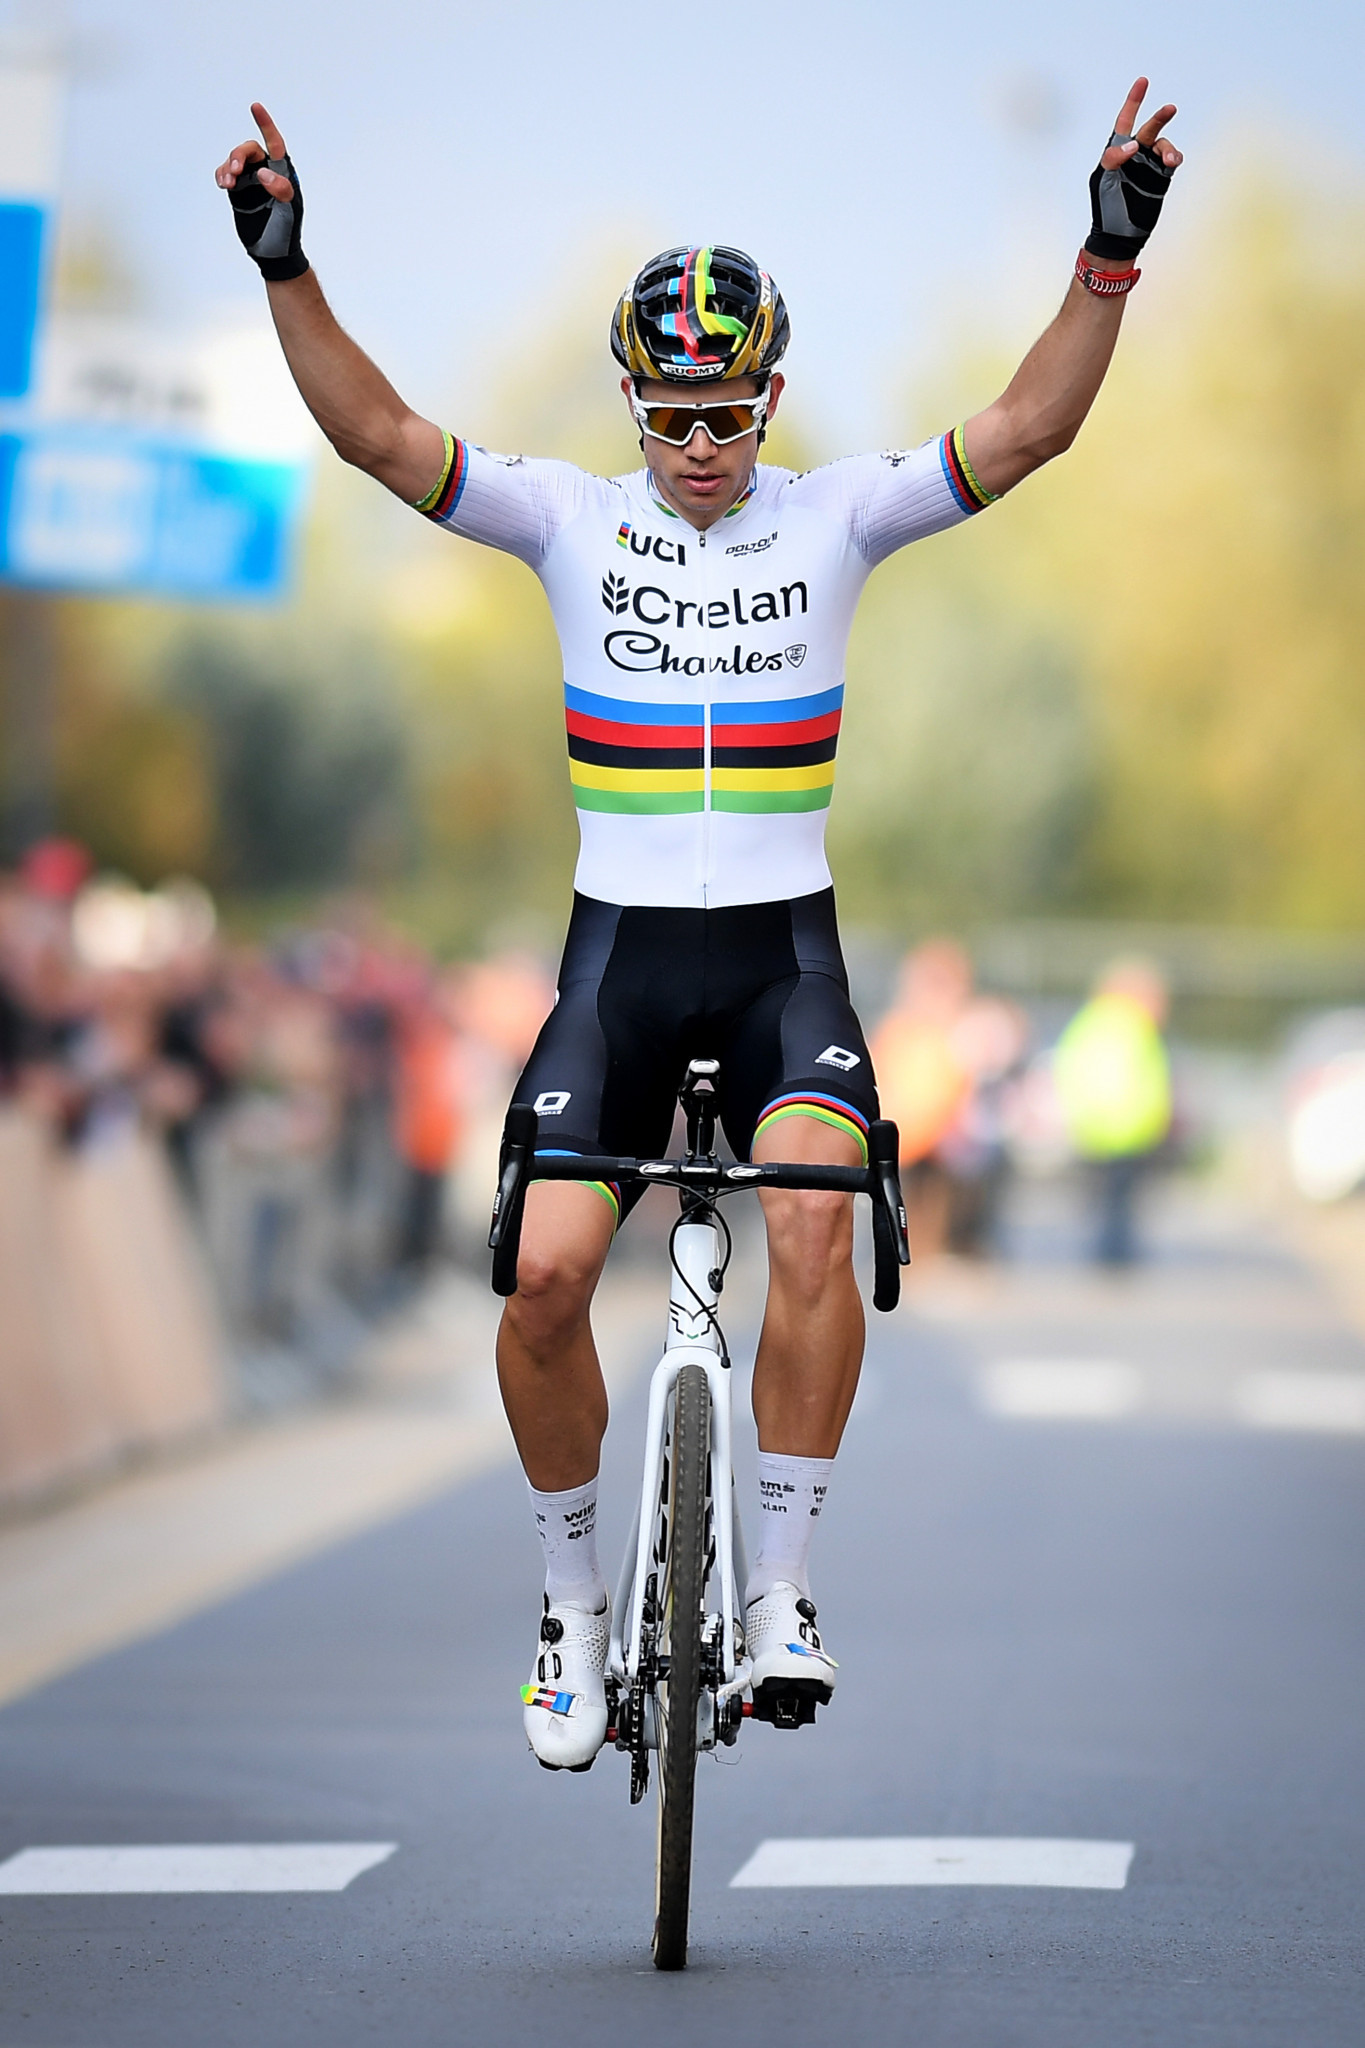 Home favourite Wout van Aert produced a dominant performance to win the men’s elite race at the UCI Cyclo-cross World Cup in Belgian city Namur ©Getty Images